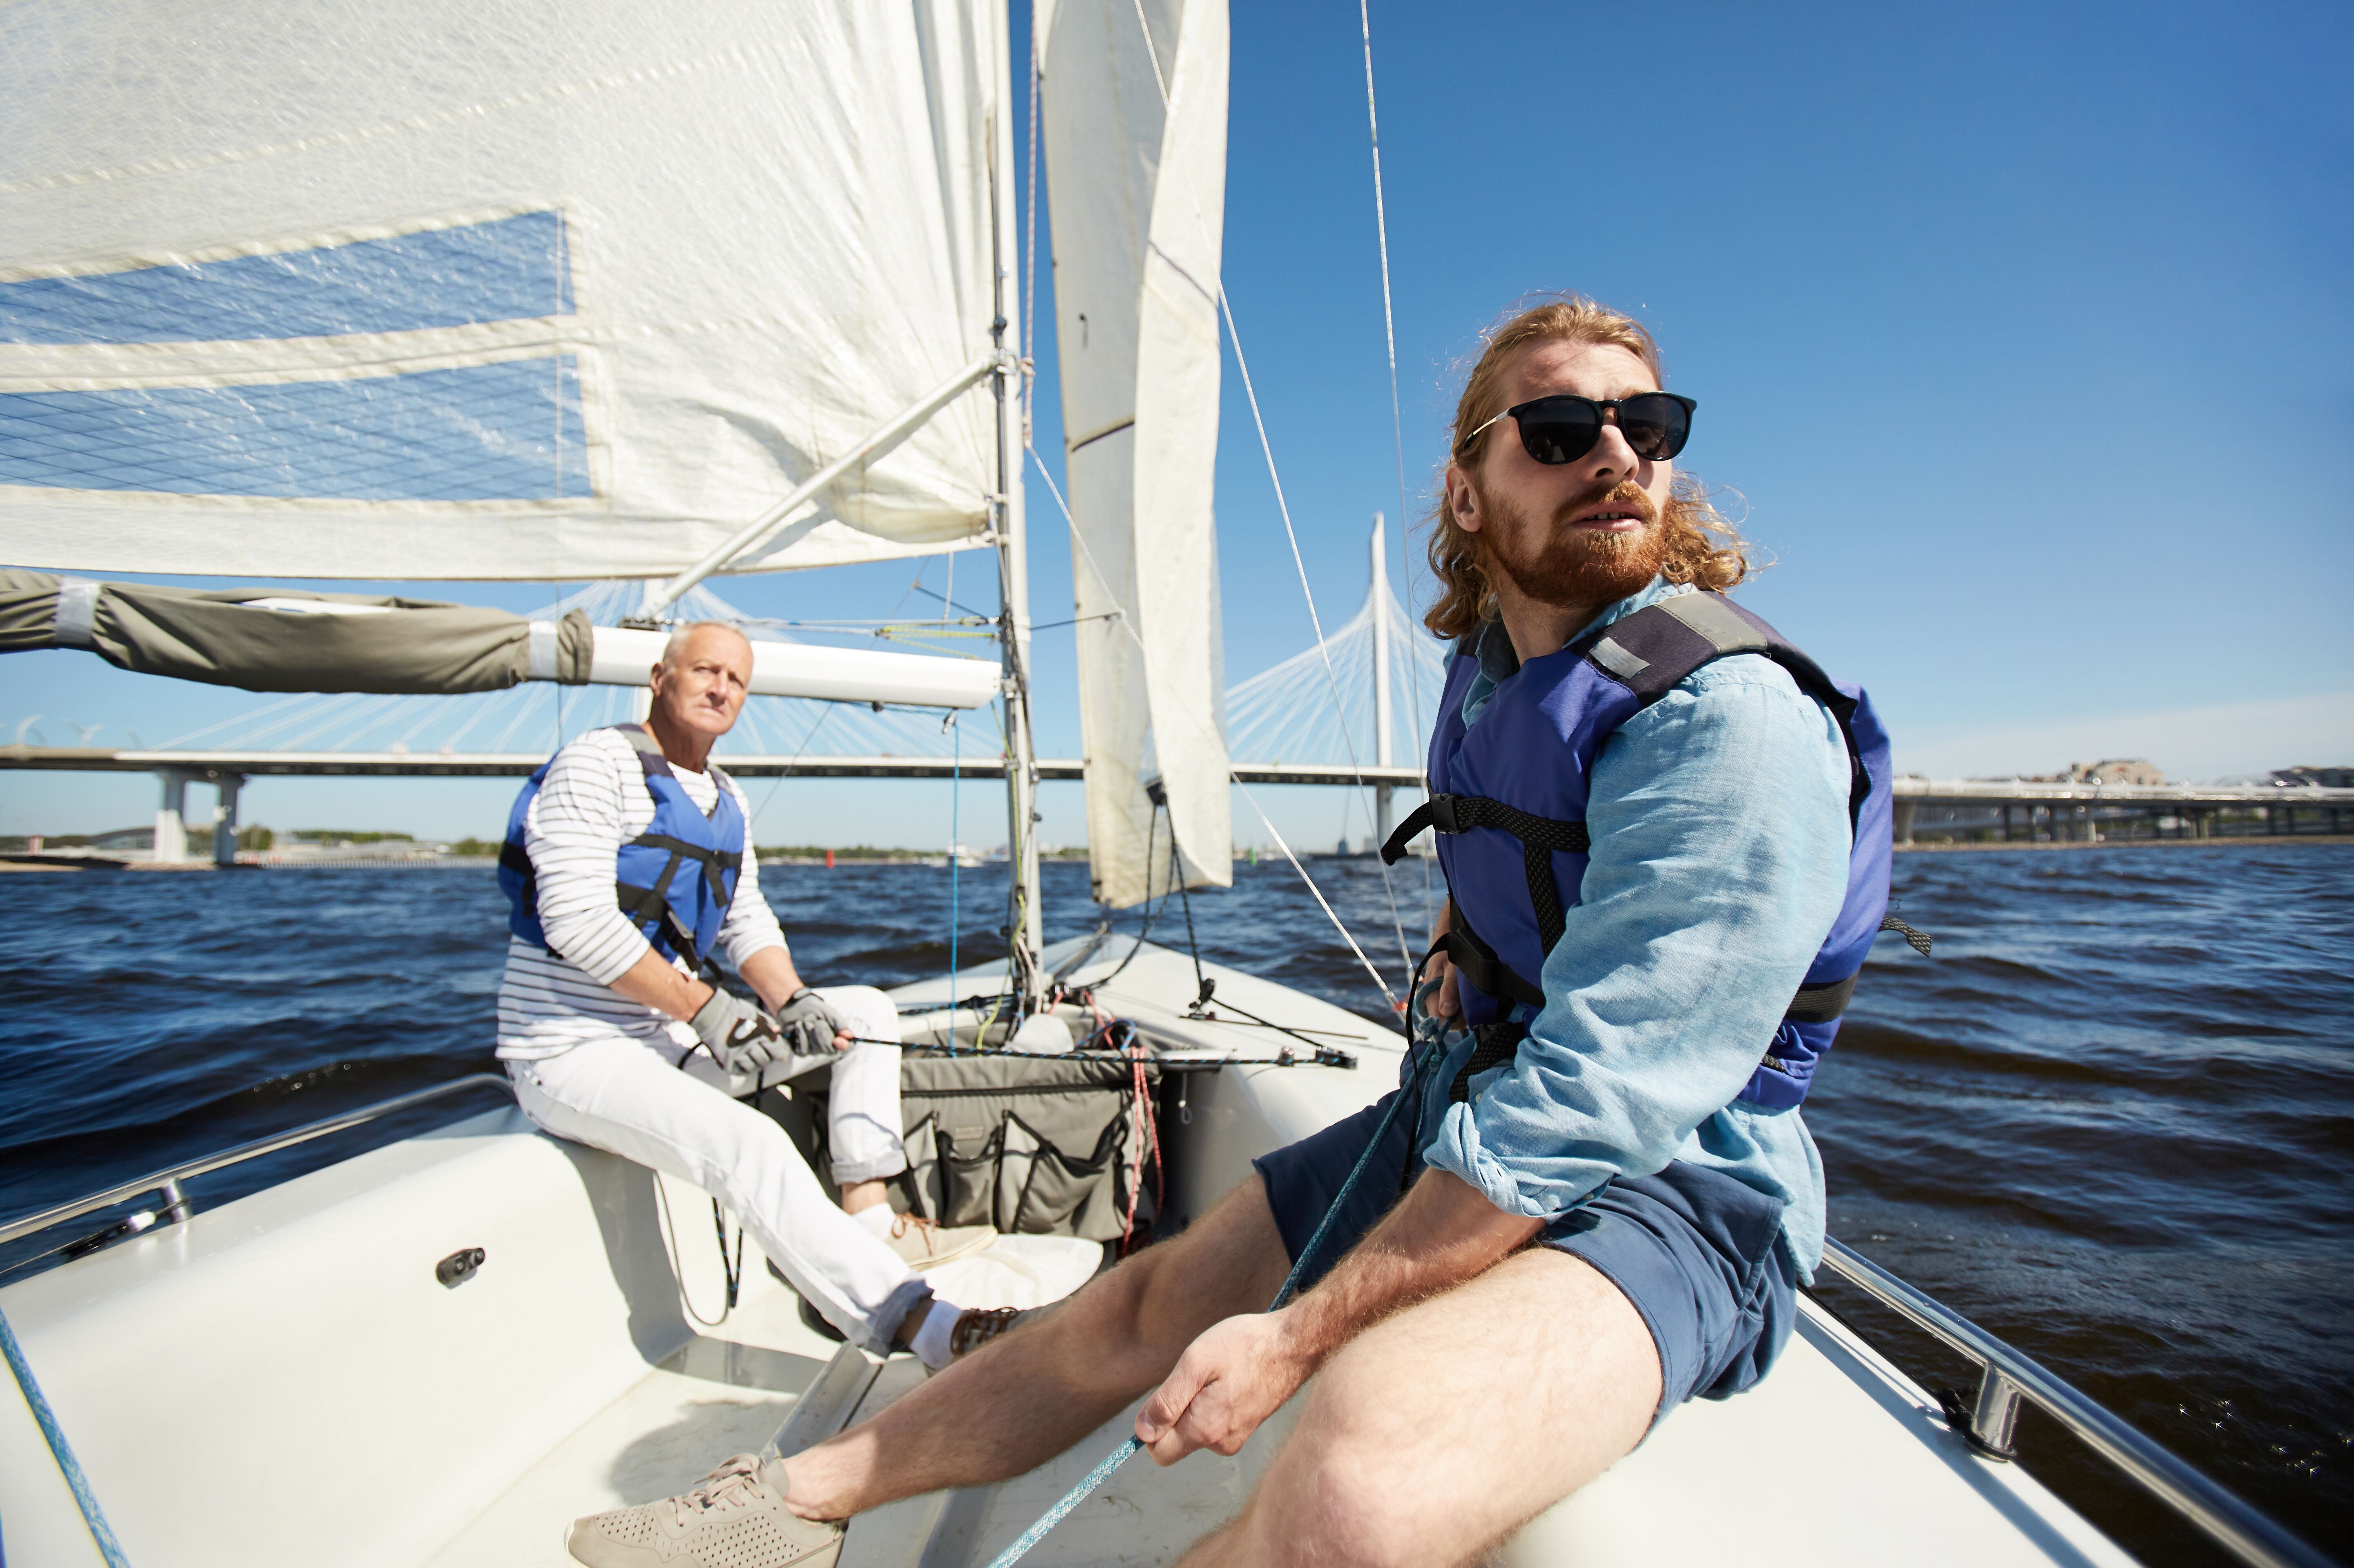 Two men operating a sailboat on the water. 